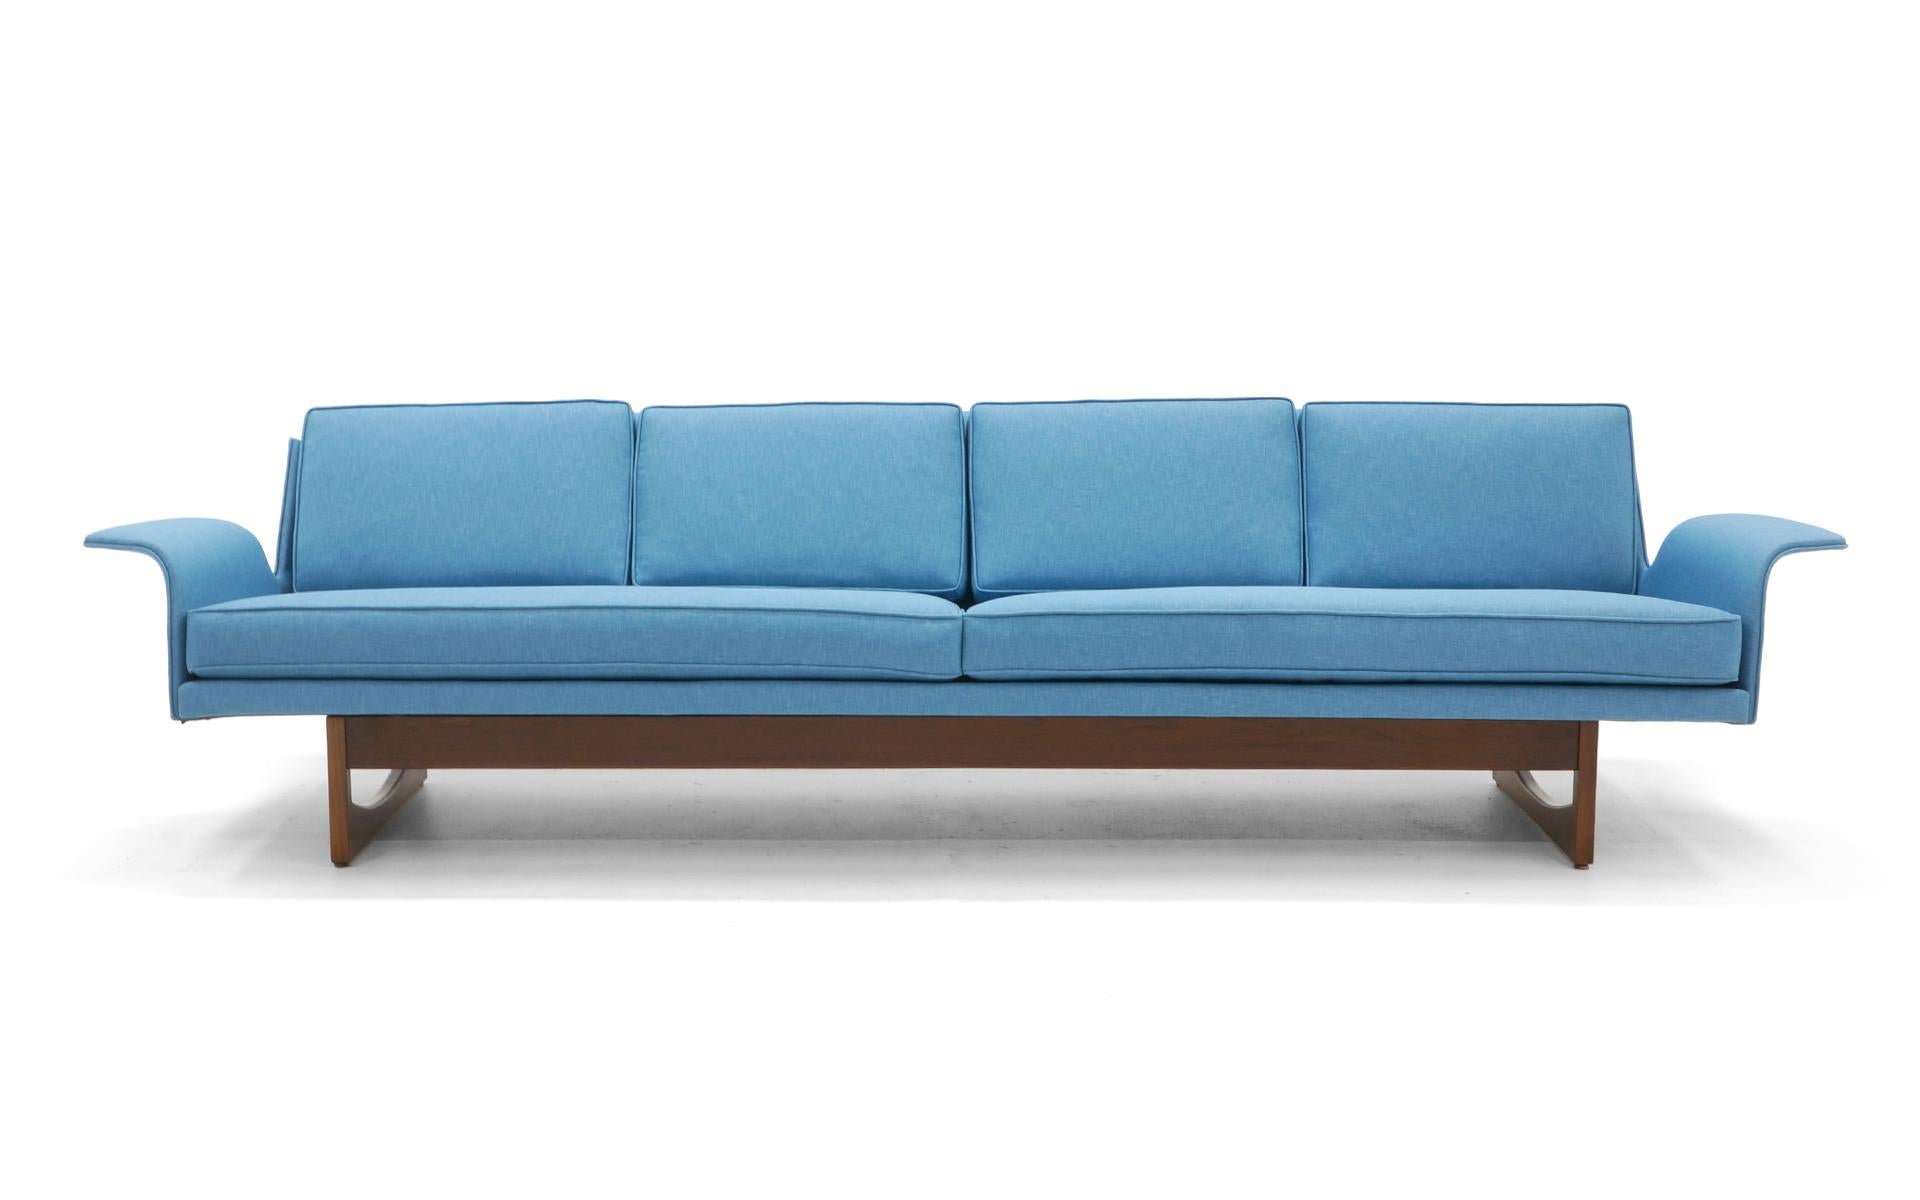 Nine feet long, four-seat sofa completely restored and in a beautiful sky blue / medium blue durable cotton and polyester fabric. We don't know if this is Danish or possible an Adrian Pearsall design for Craft Associates. The bent wood arms are